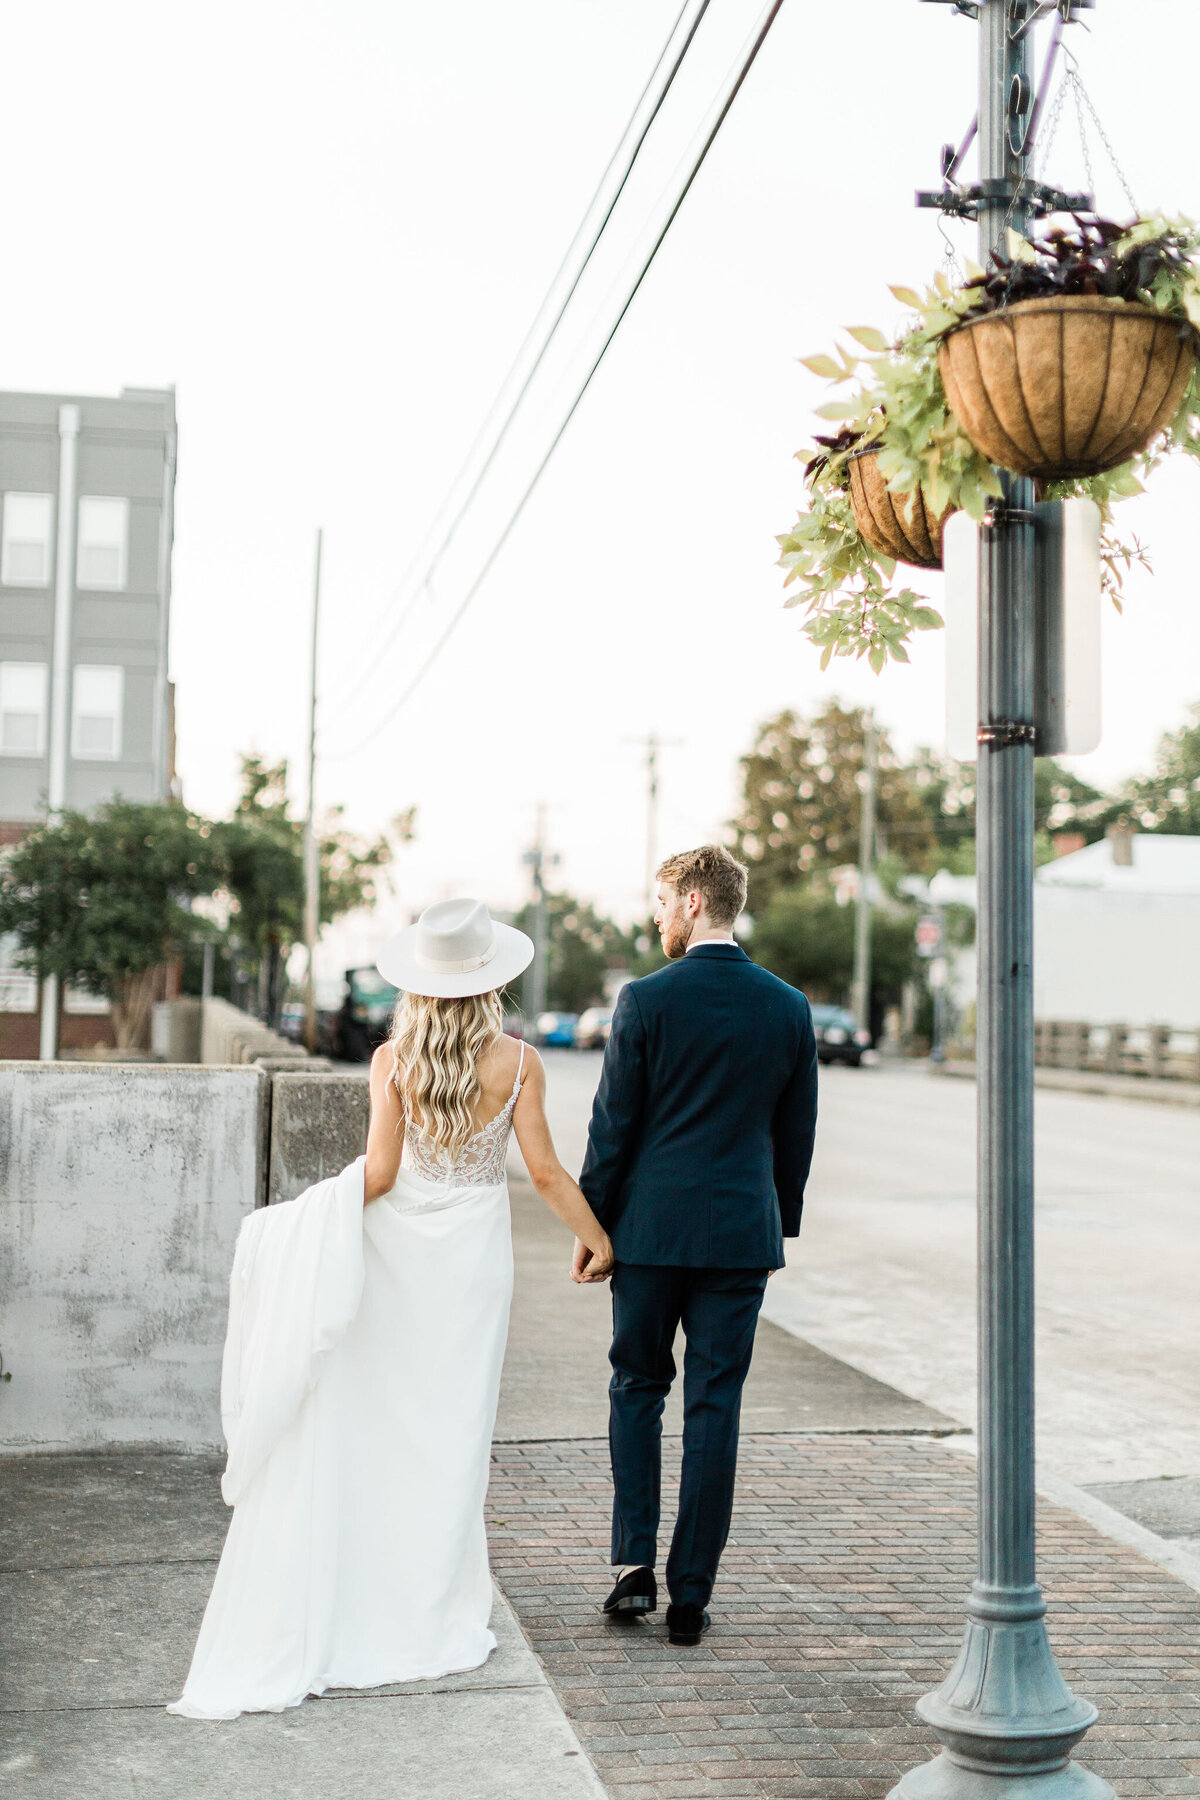 Downtown Wilmington in beautiful in these stunning wedding photos.